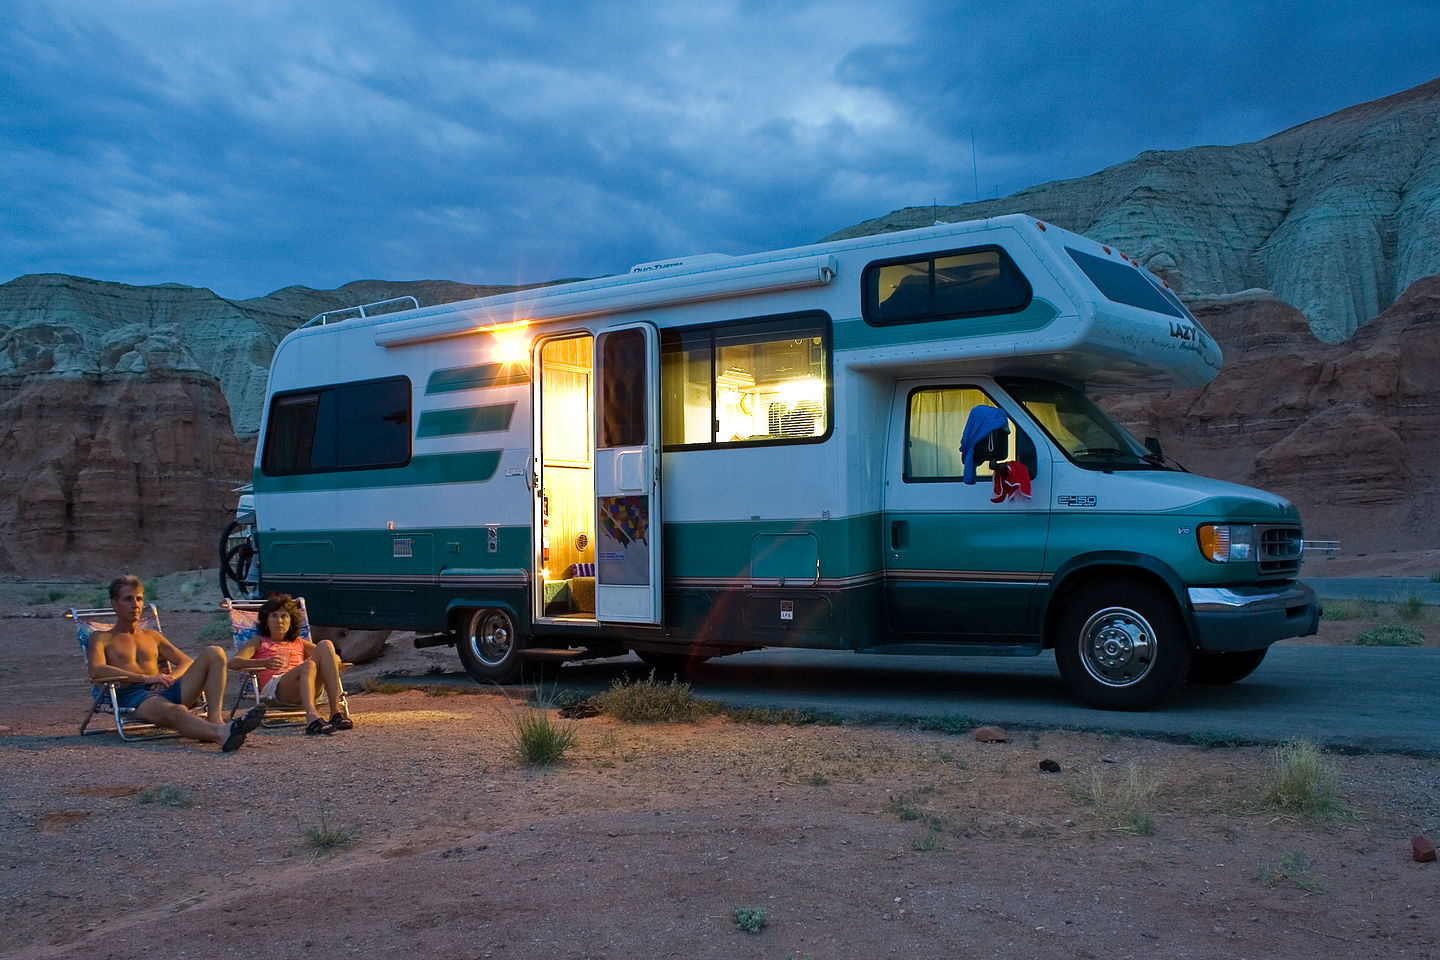 Parents with Lazy Daze in Goblin Valley Campground - AJG